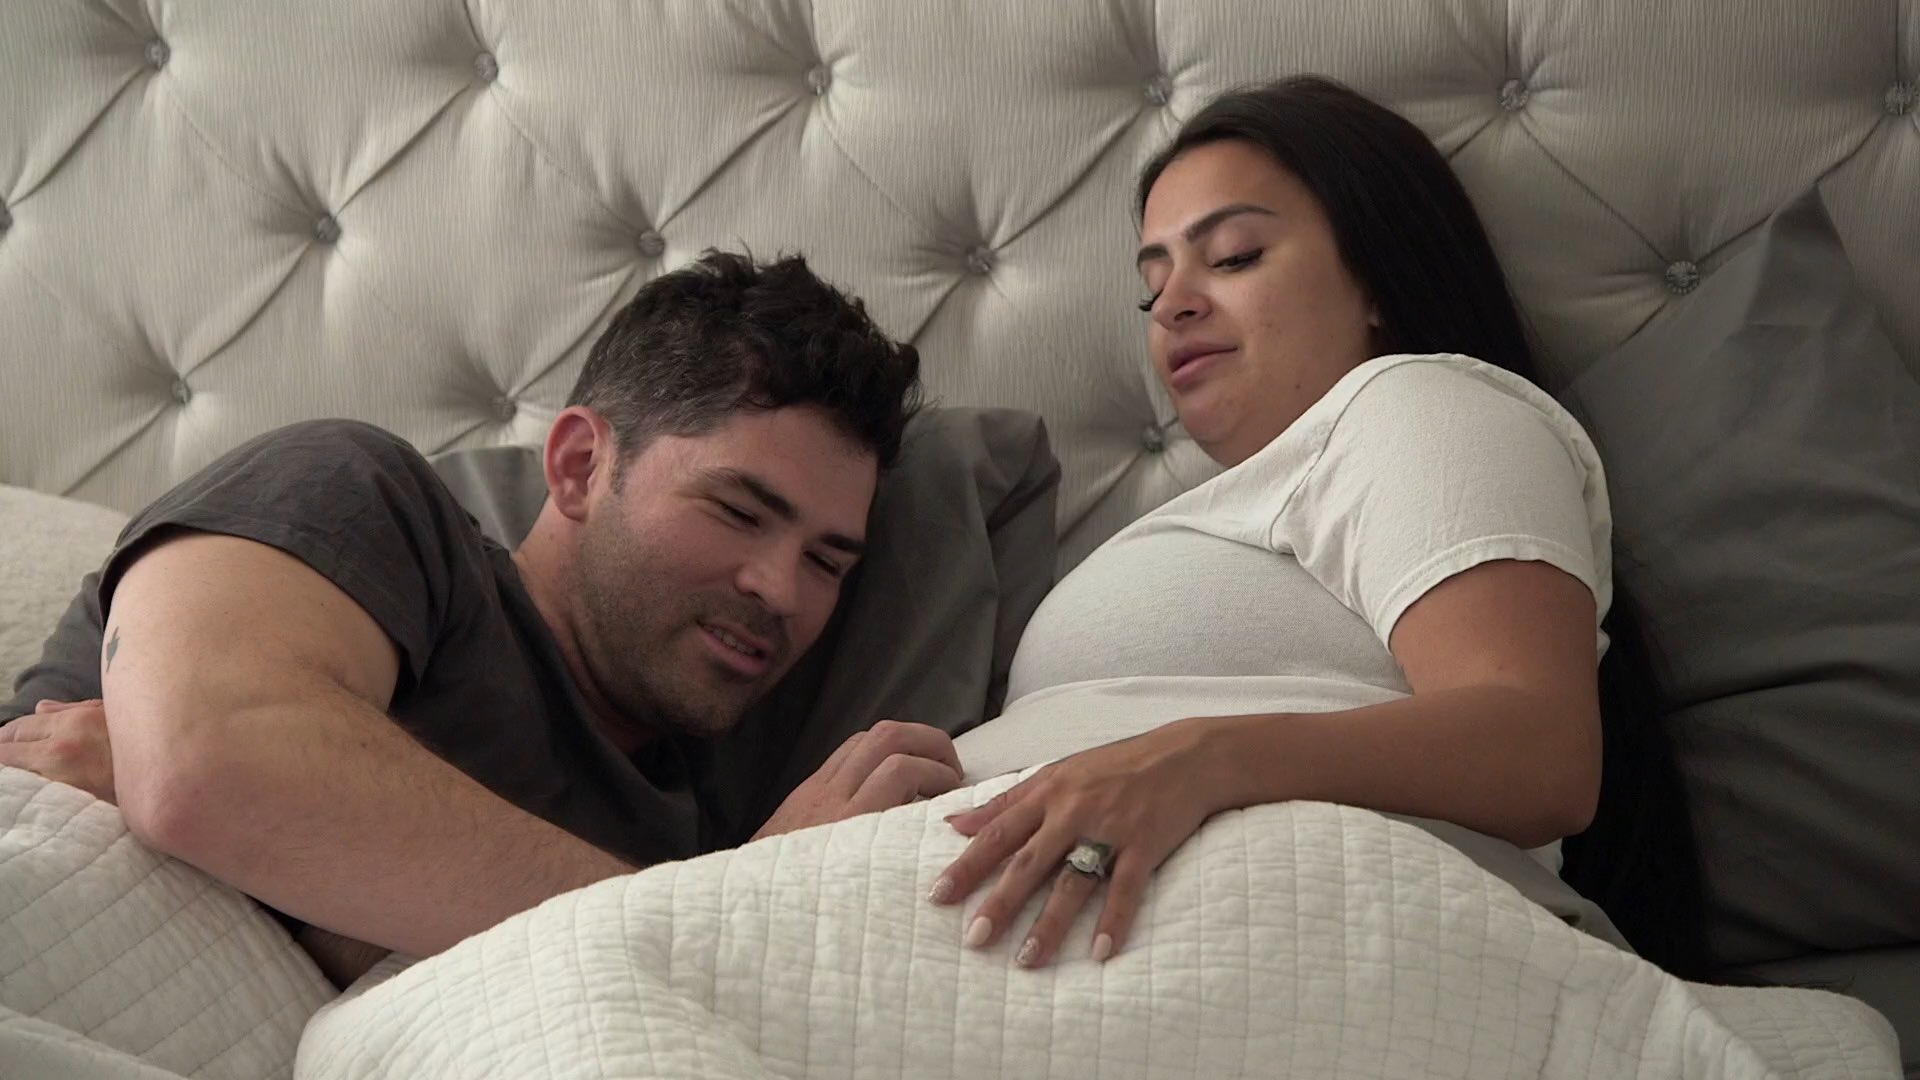 Gus Gazda and Nilsa Prowant lay together in bed in an episode of 'Floribama Shore'